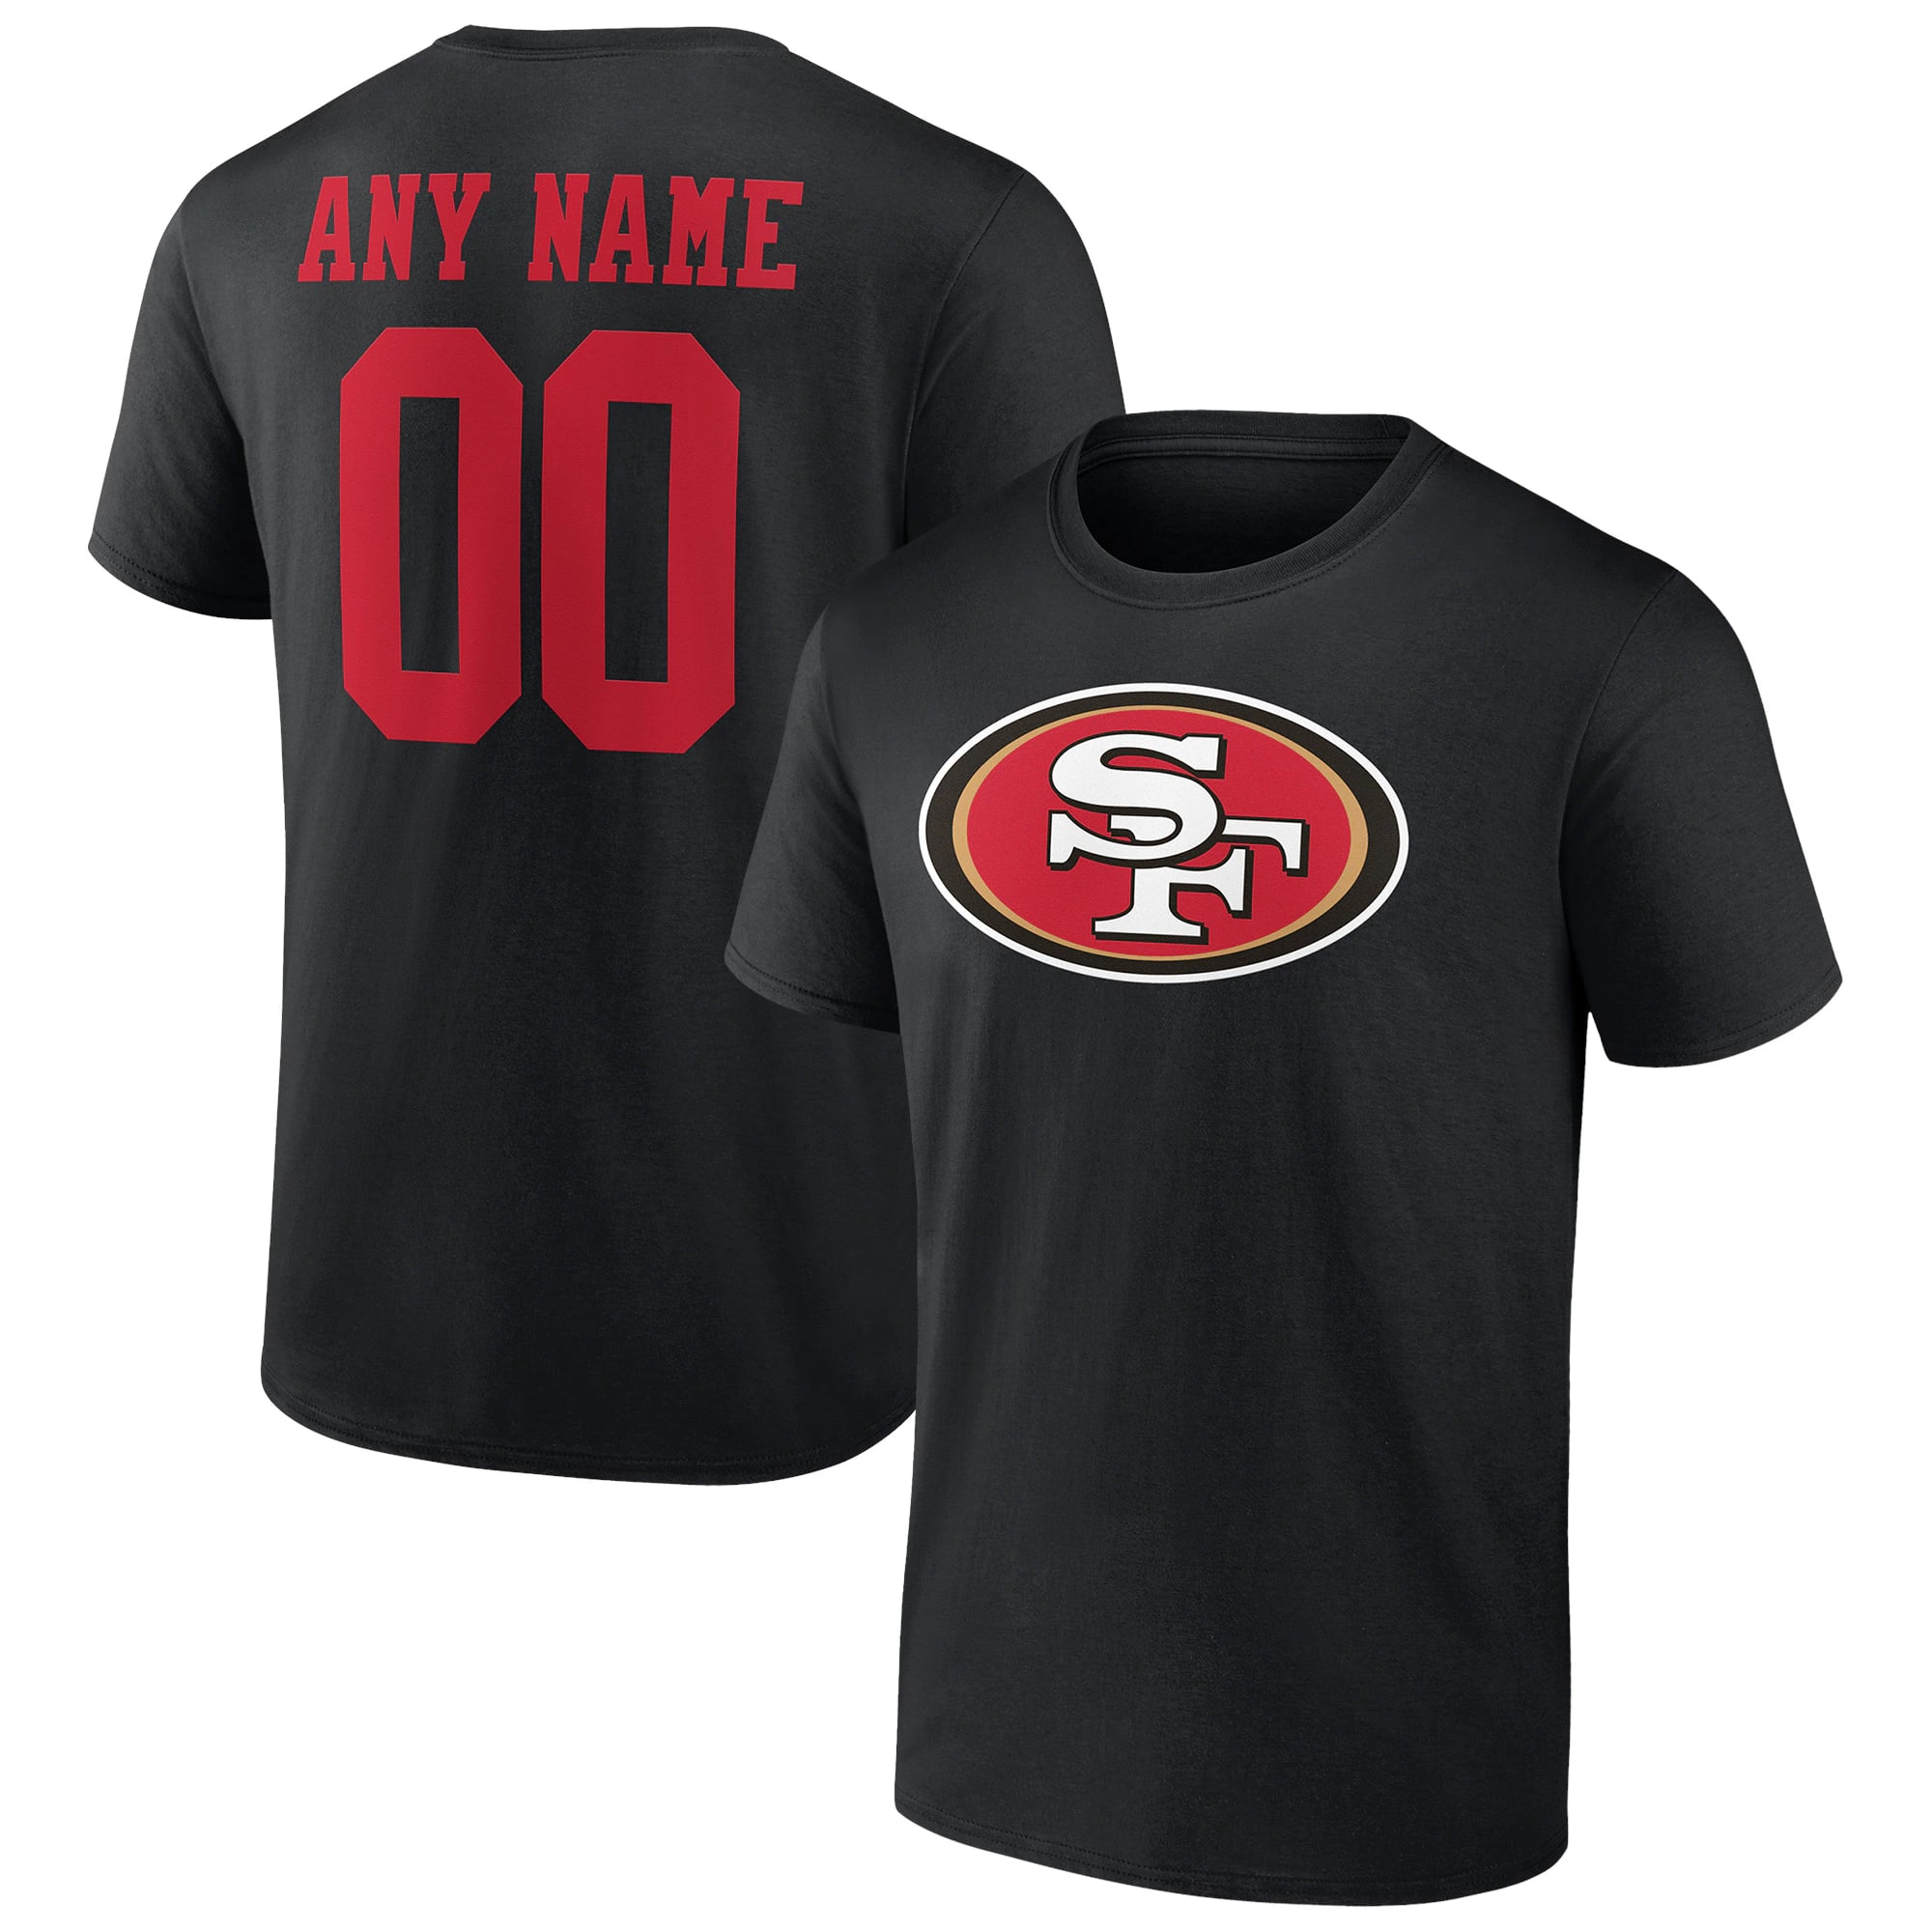 San Francisco 49ers Fanatics Branded Team Authentic Logo Personalized Name Number Black T Shirt